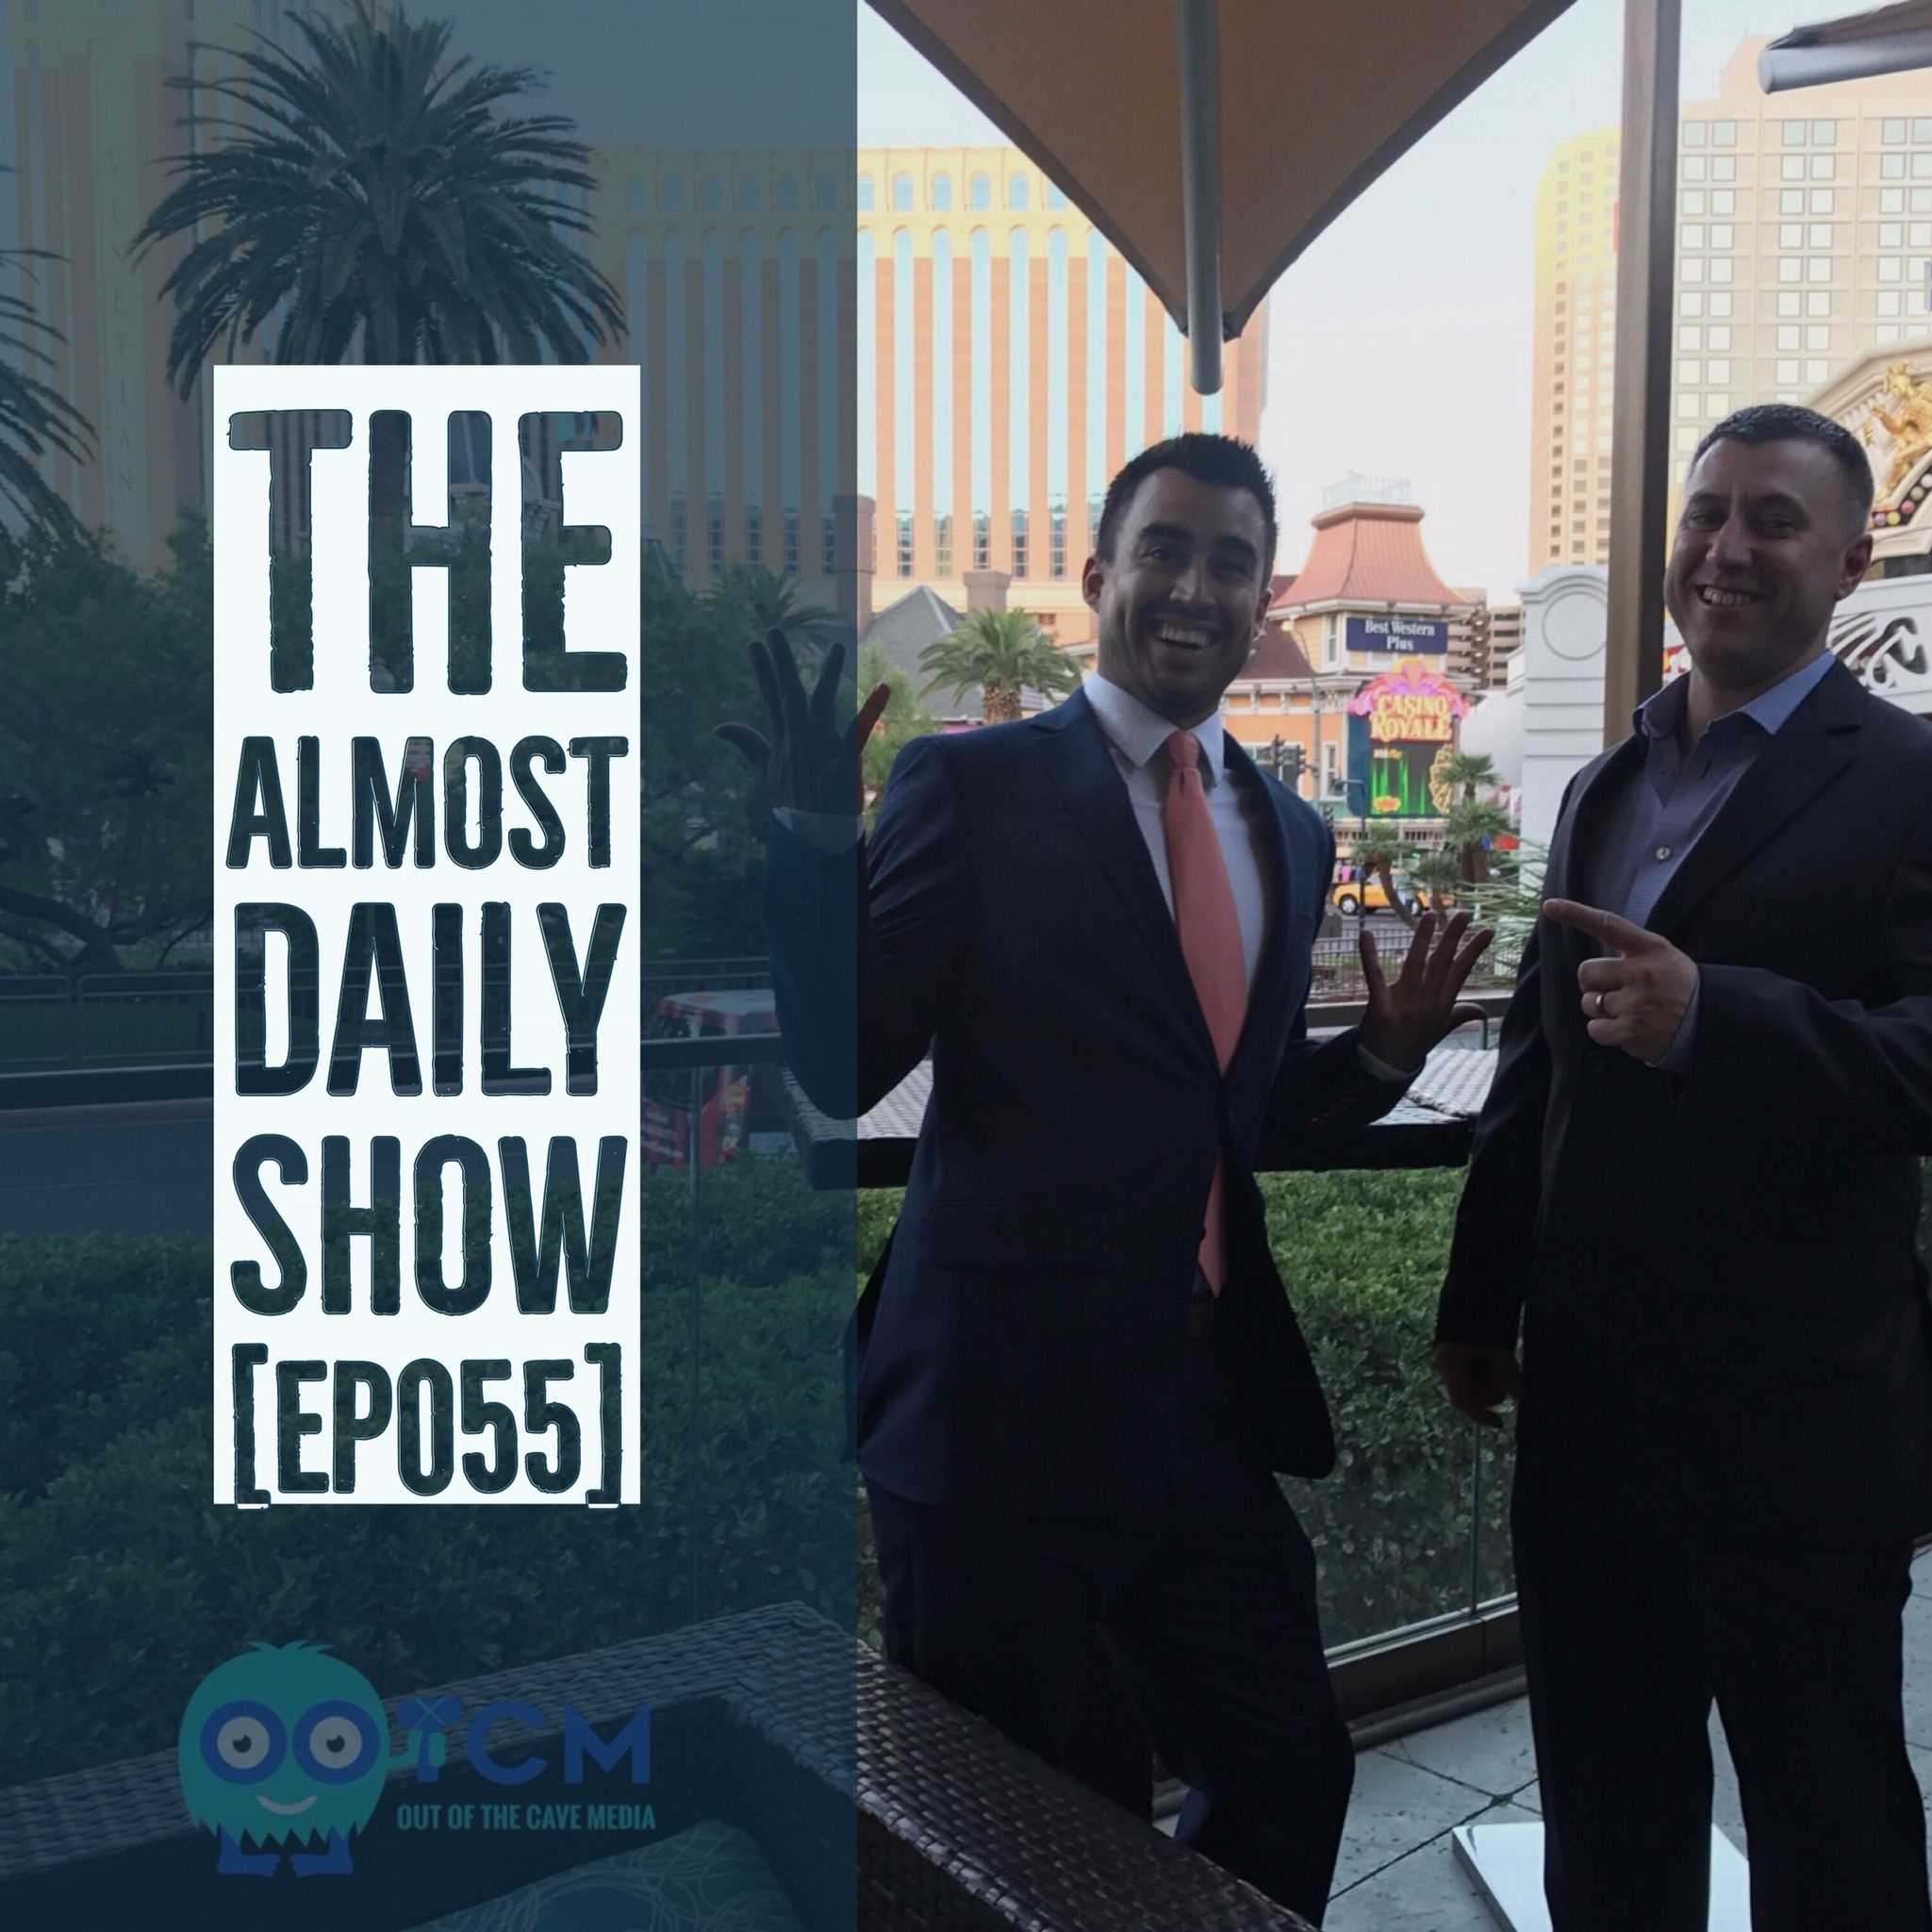 Being An Inspirational Leader | The Almost Daily Show Ep 055